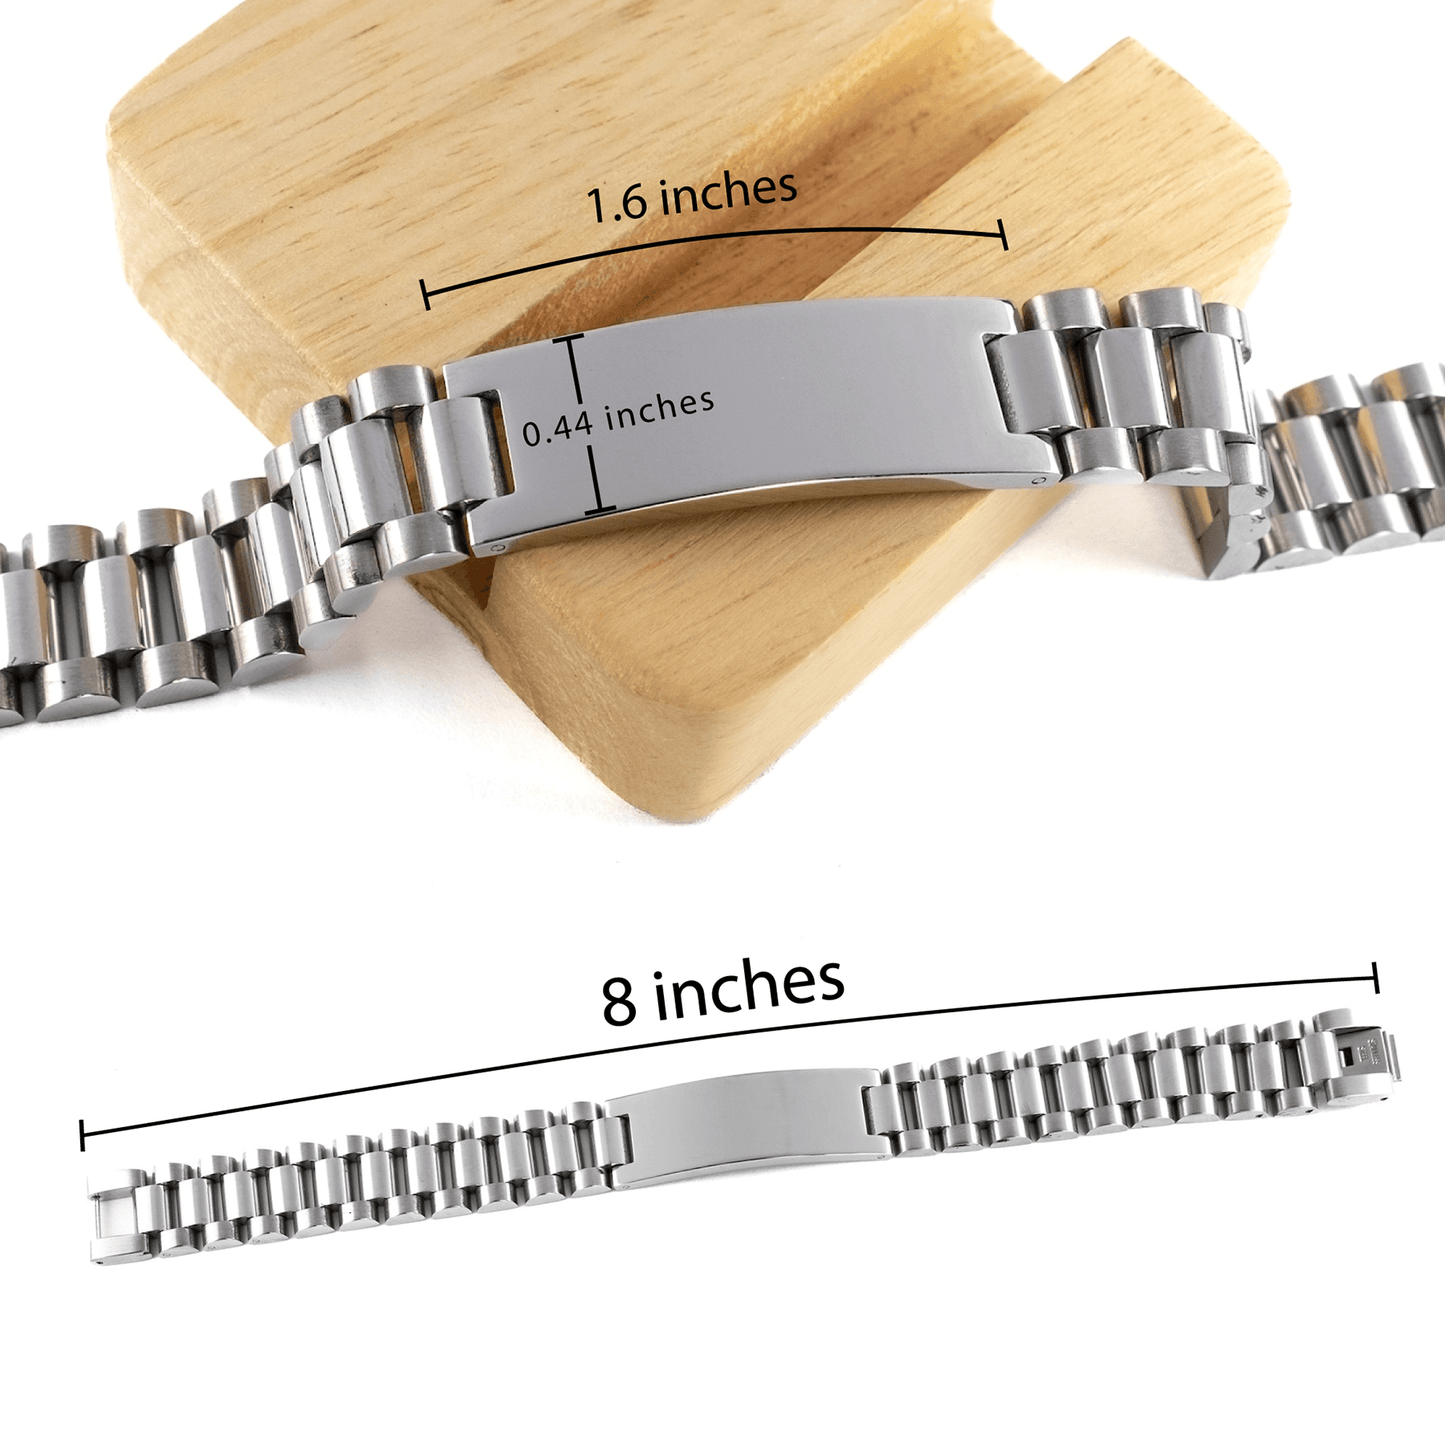 Remarkable Crane Operator Gifts, Your dedication and hard work, Inspirational Birthday Christmas Unique Ladder Stainless Steel Bracelet For Crane Operator, Coworkers, Men, Women, Friends - Mallard Moon Gift Shop